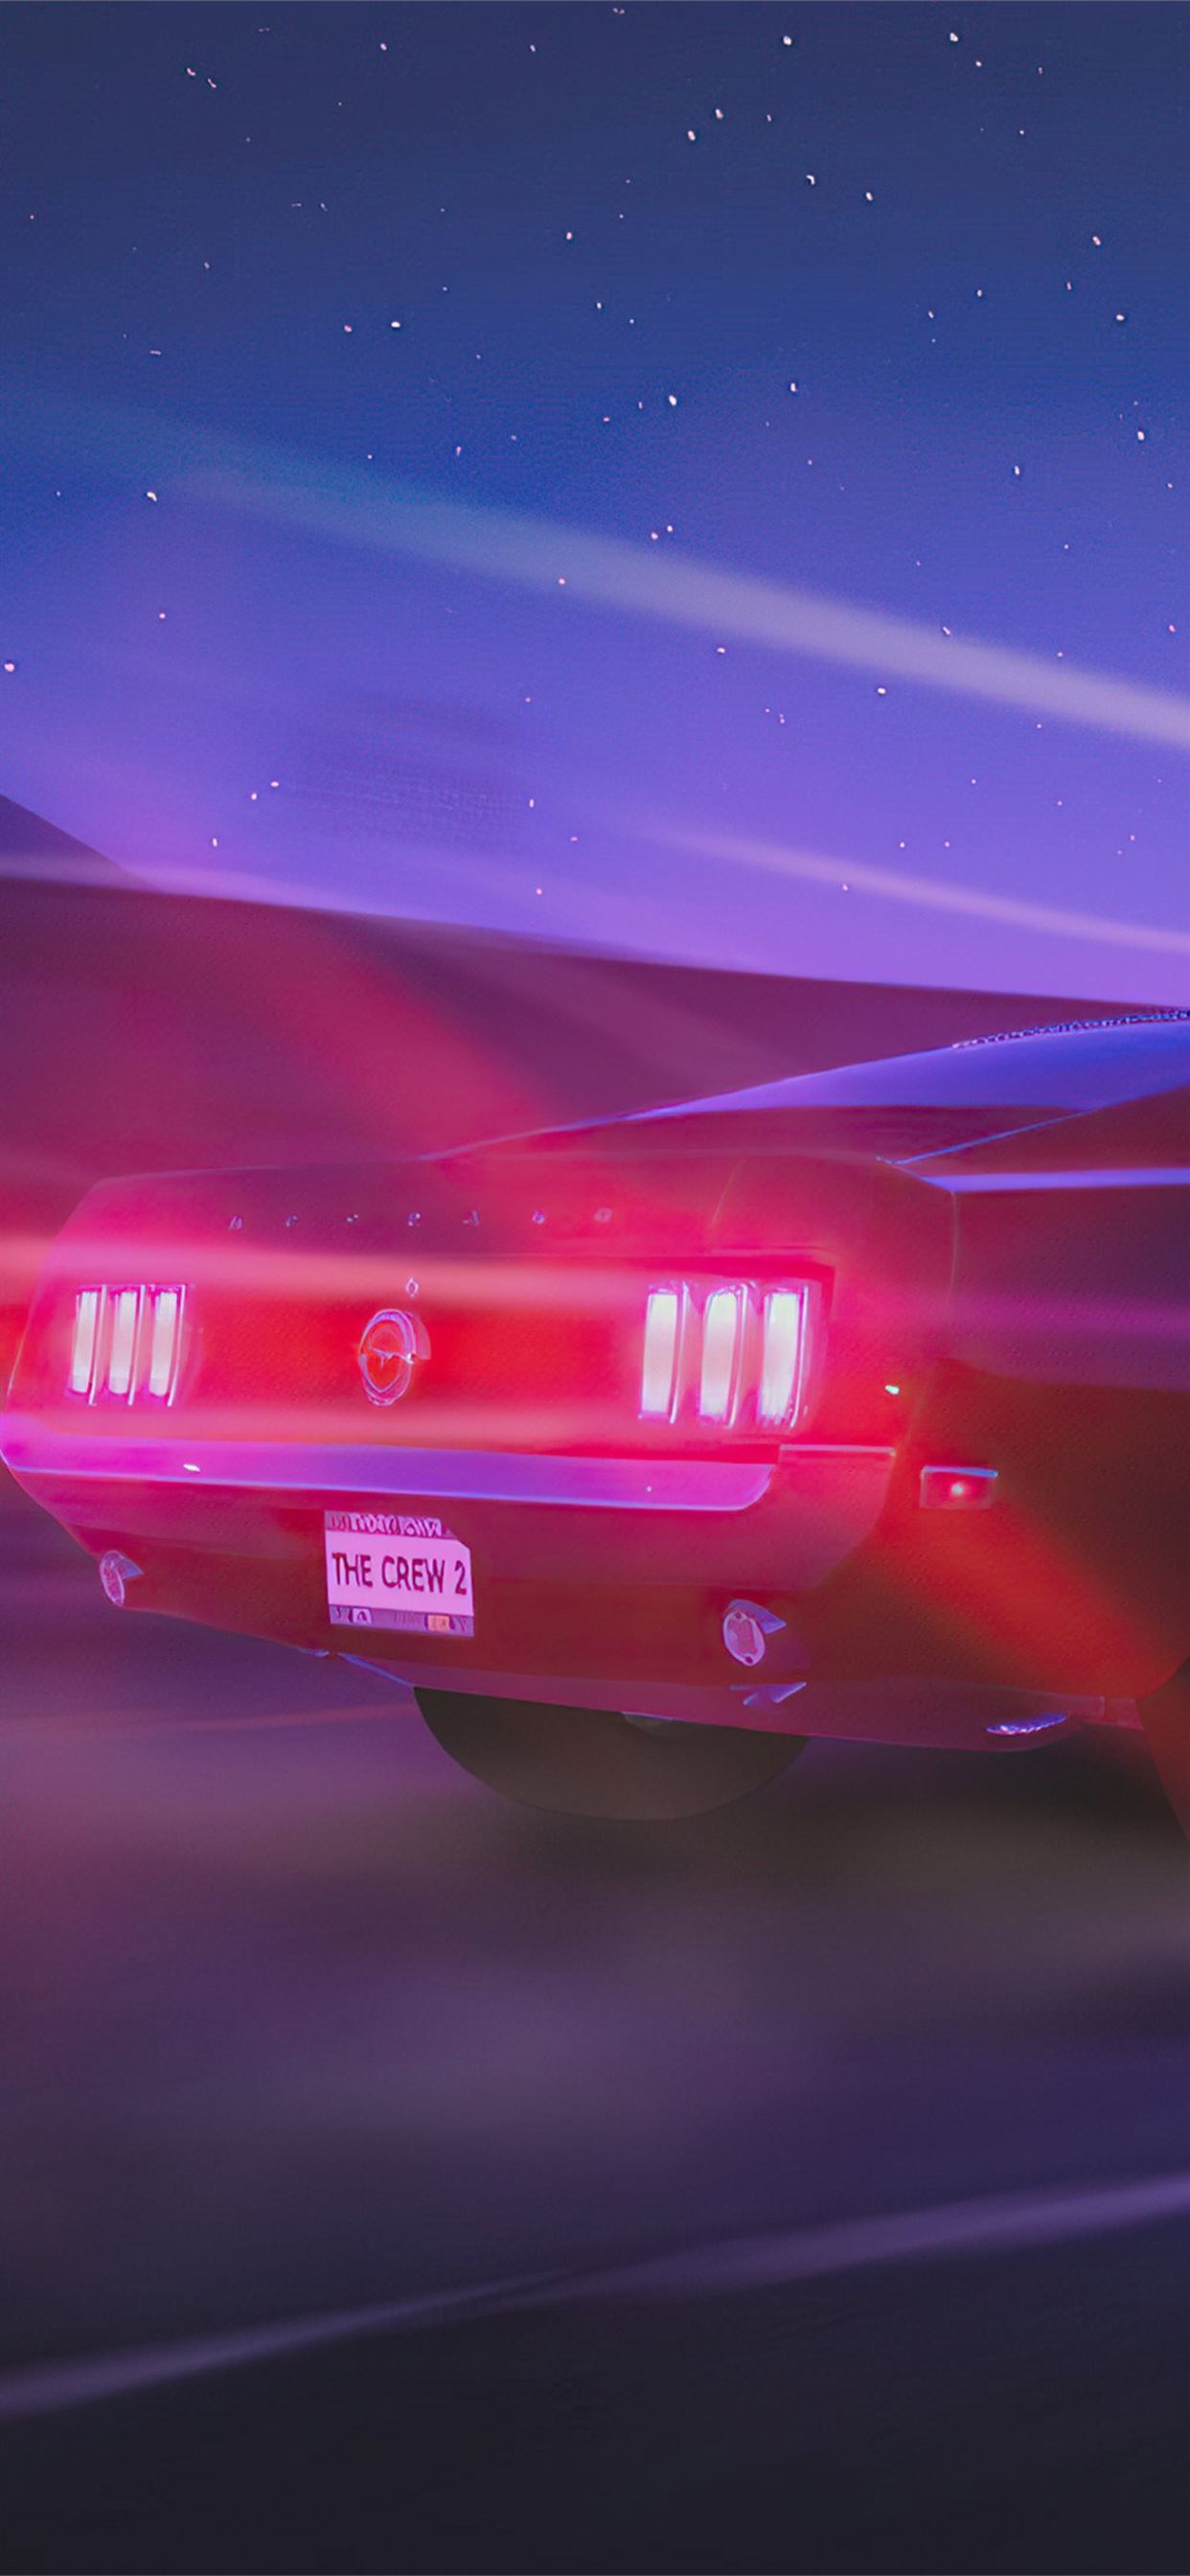 Ford Mustang The Crew 2 Game 4K Iphone X Wallpapers Free Download